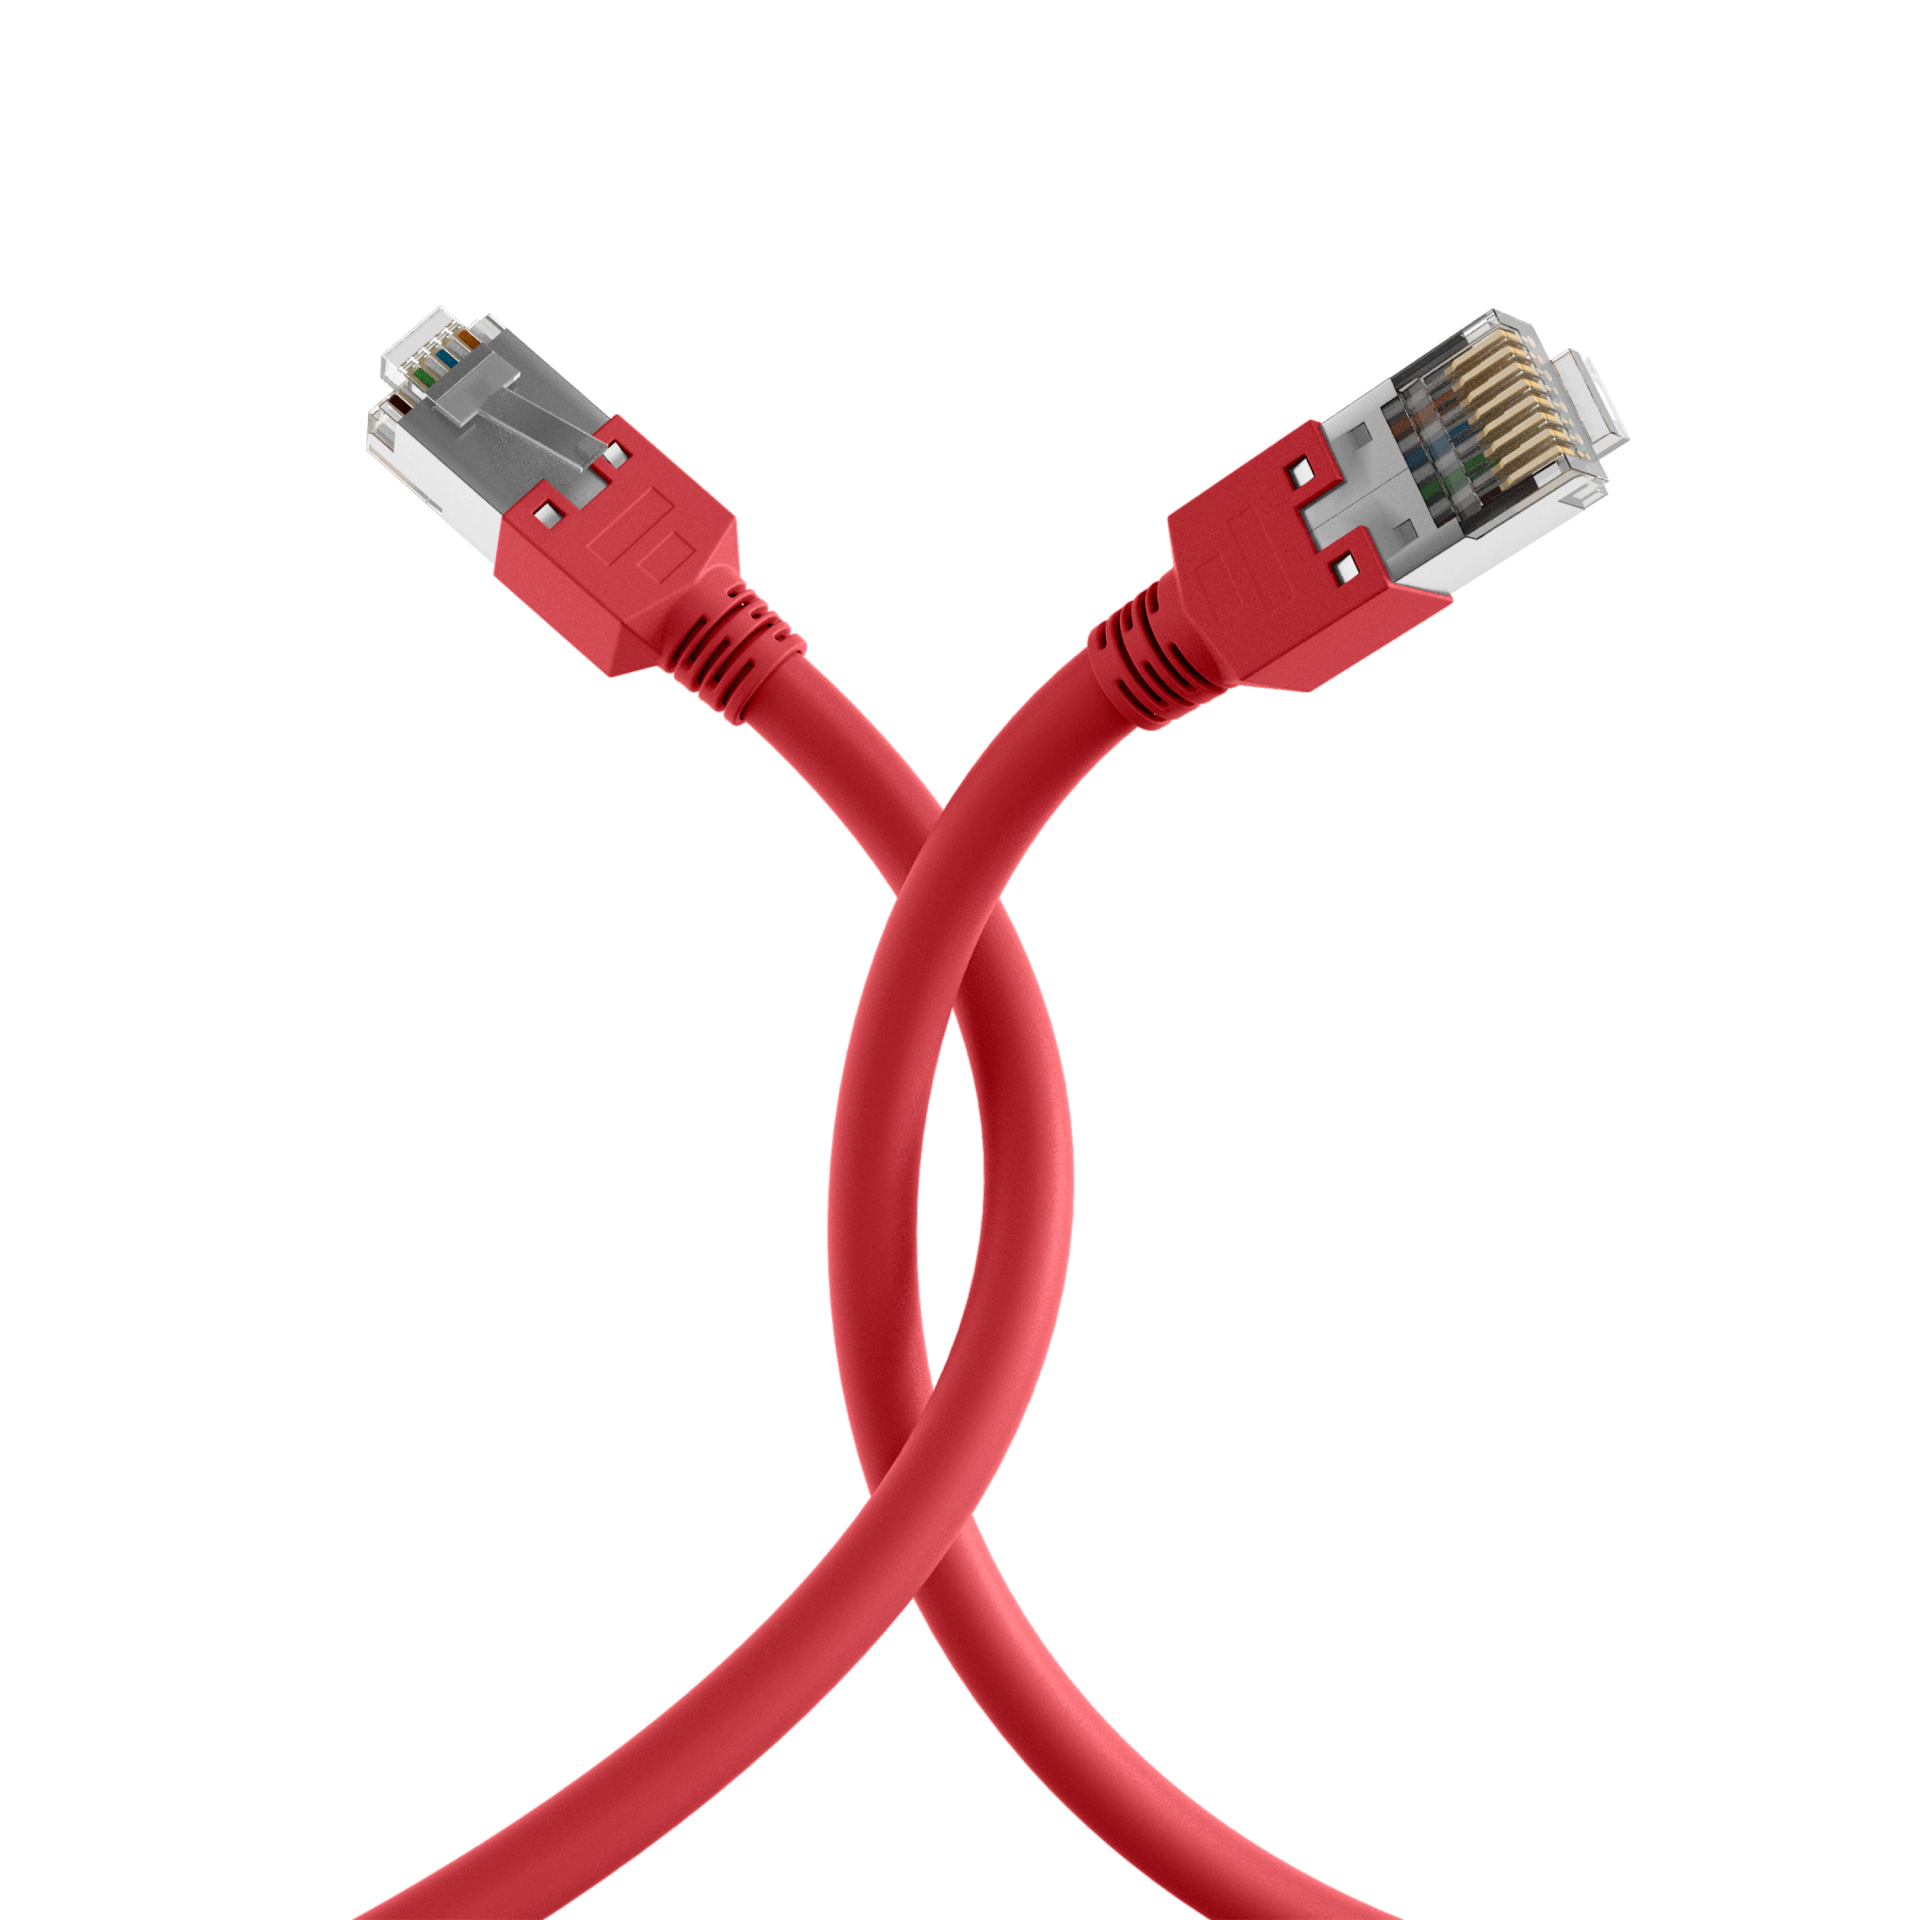 RJ45 Patch Cord Cat.5e S/UTP PVCDätwyler 5502 TM11 red 1m